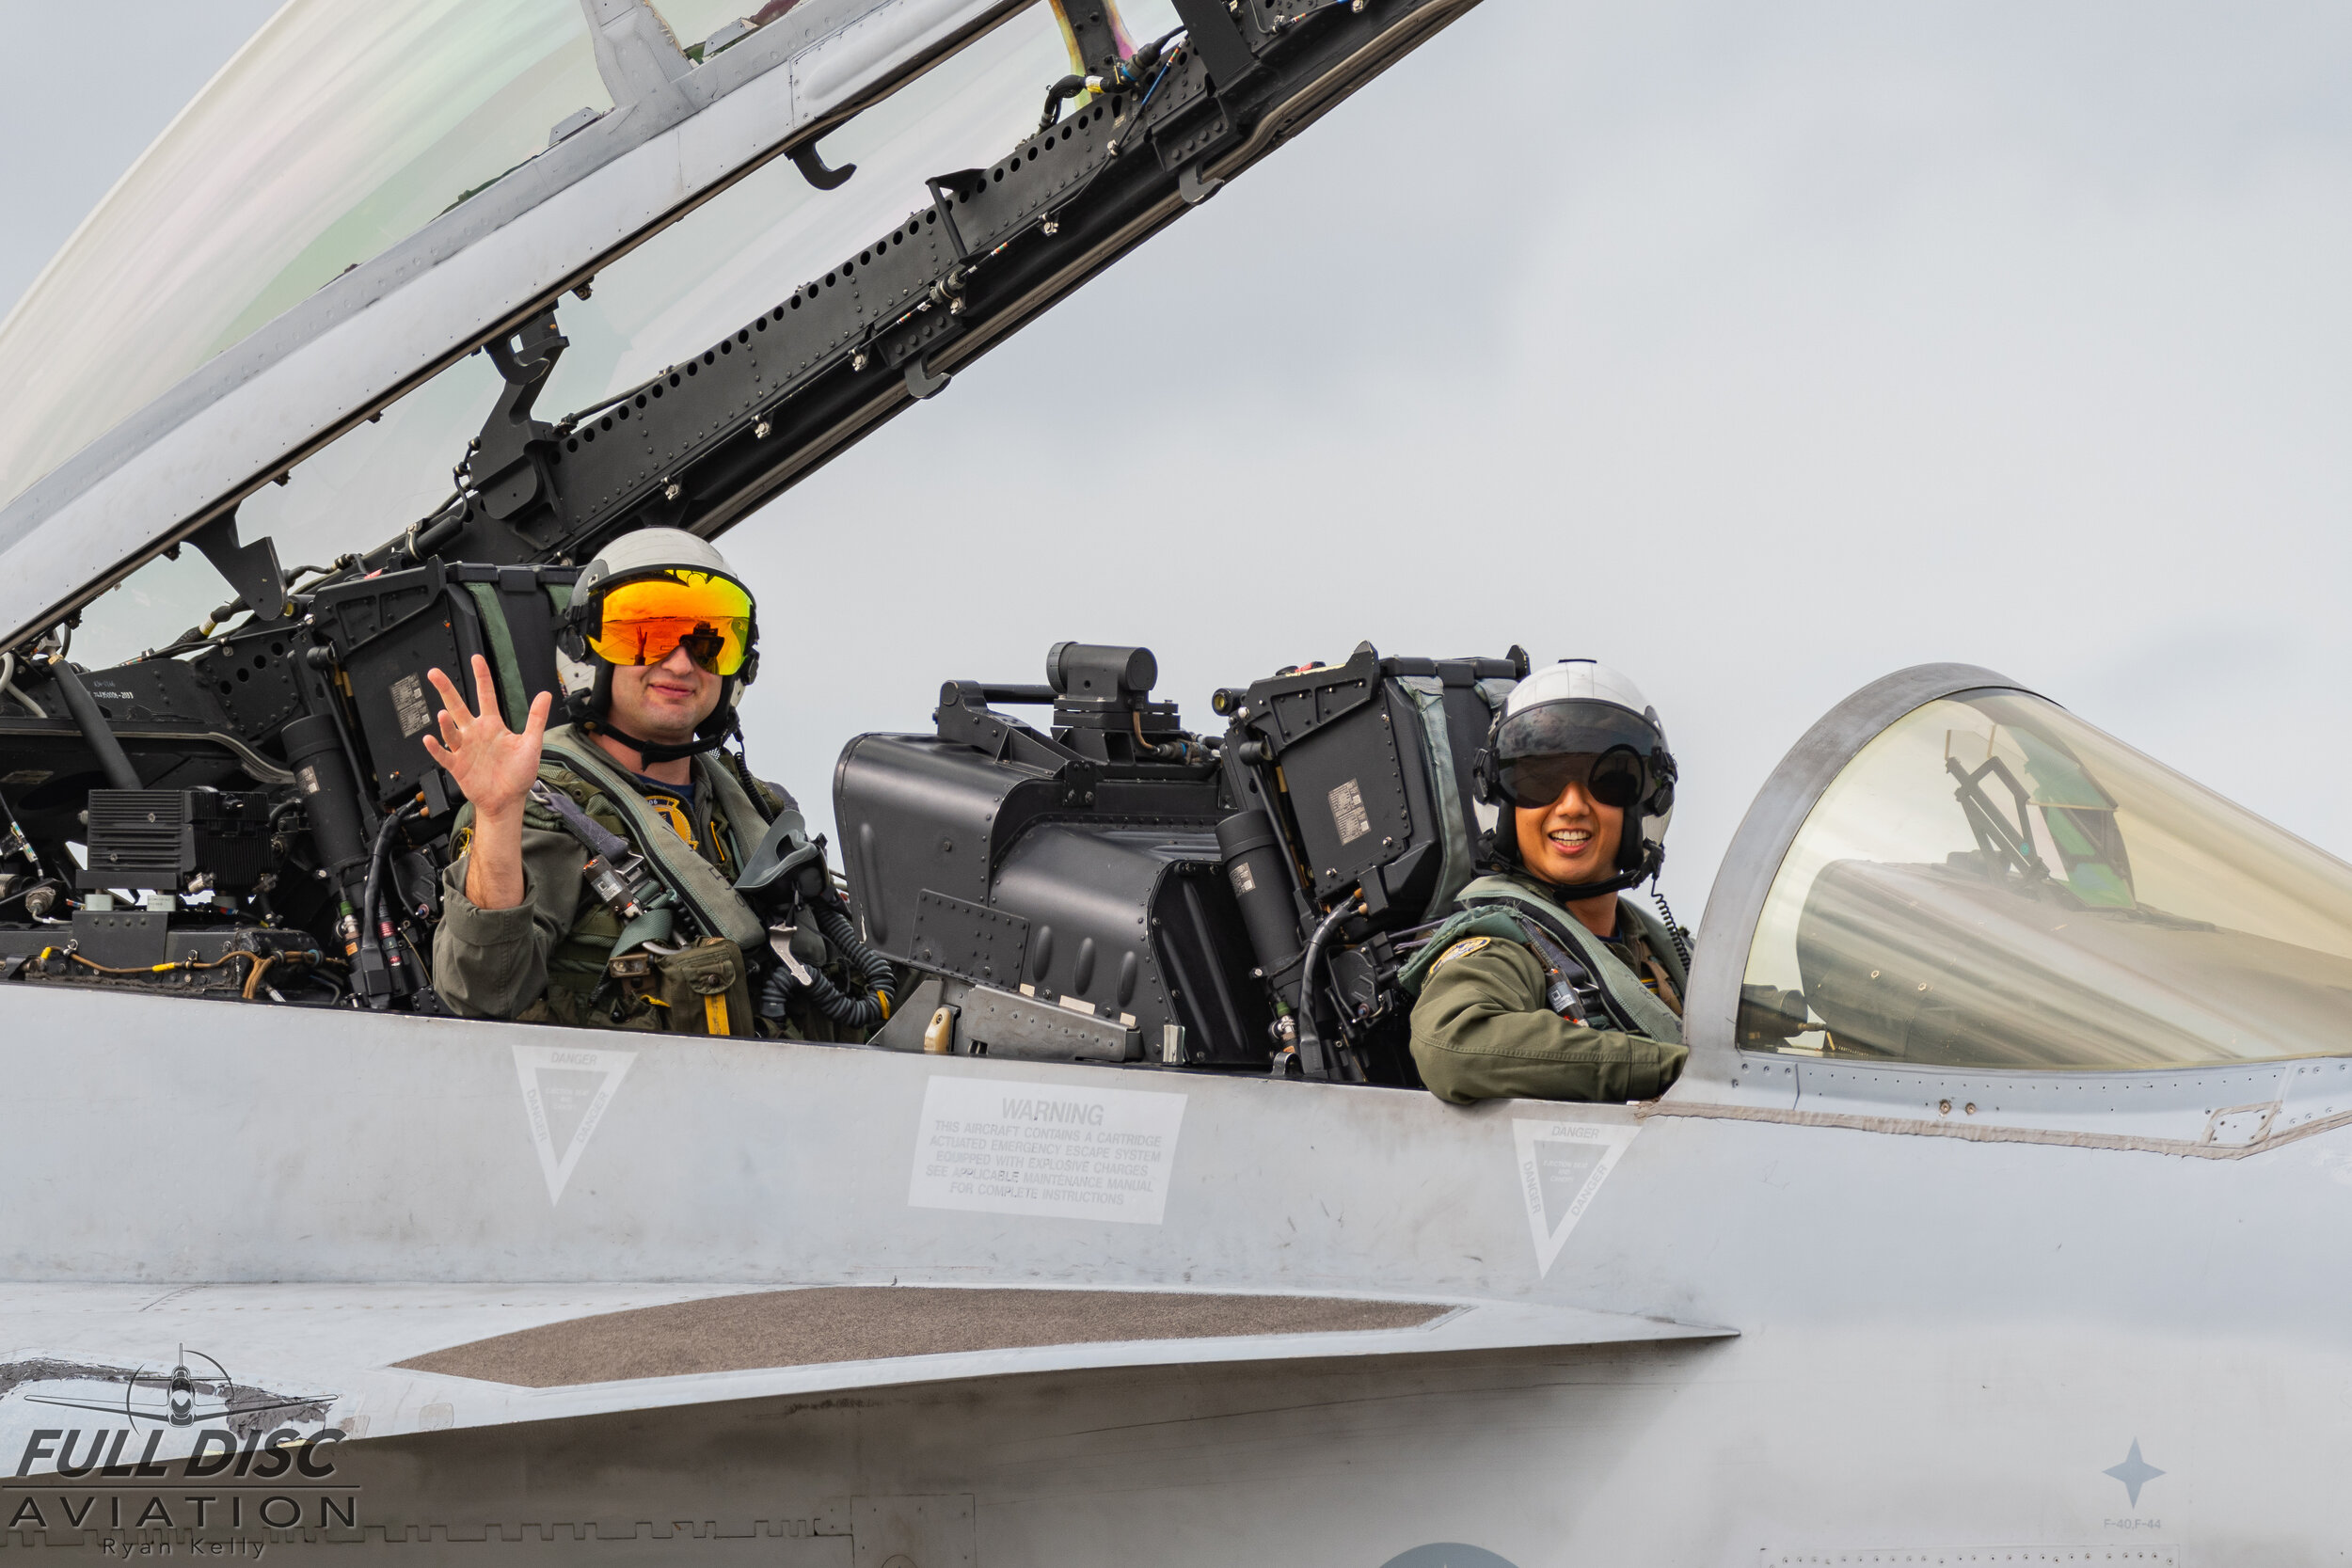 VFA-106 Rhino Demo Team — Full Disc Aviation - Sharing Aviation Photography  and Stories